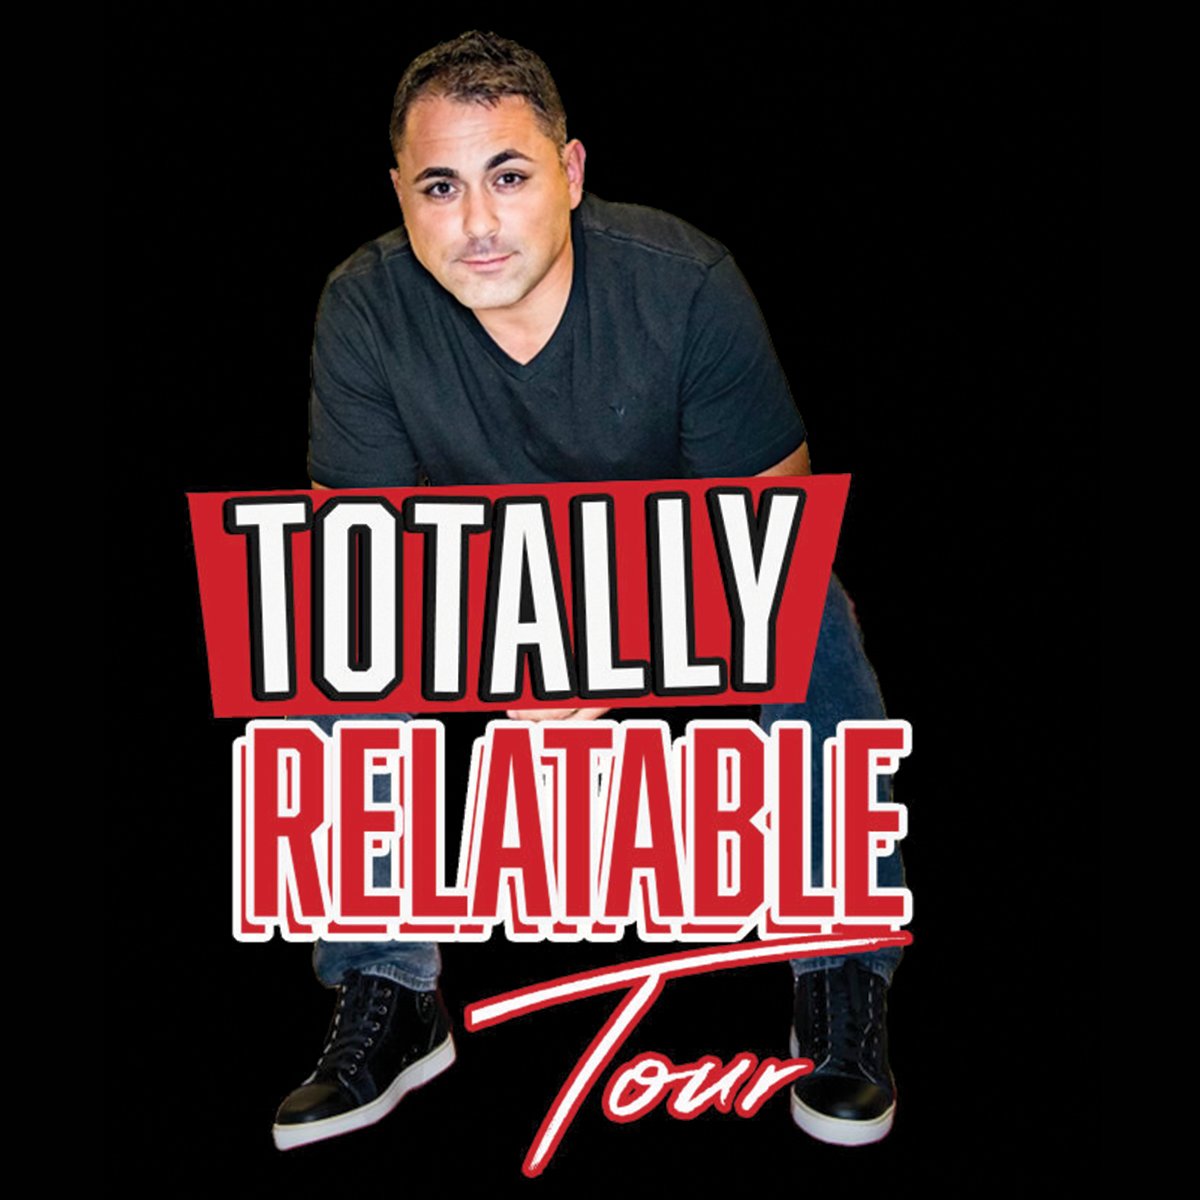 ONE WEEK 🎤 Ruth Eckerd Hall On The Road presents @RodiaComedy at the @tampatheatre Fri, Mar 22 on his Totally Relatable Tour! Great seats still available. Reserve your tickets today by visiting: rutheckerdhall.com/events/detail/…